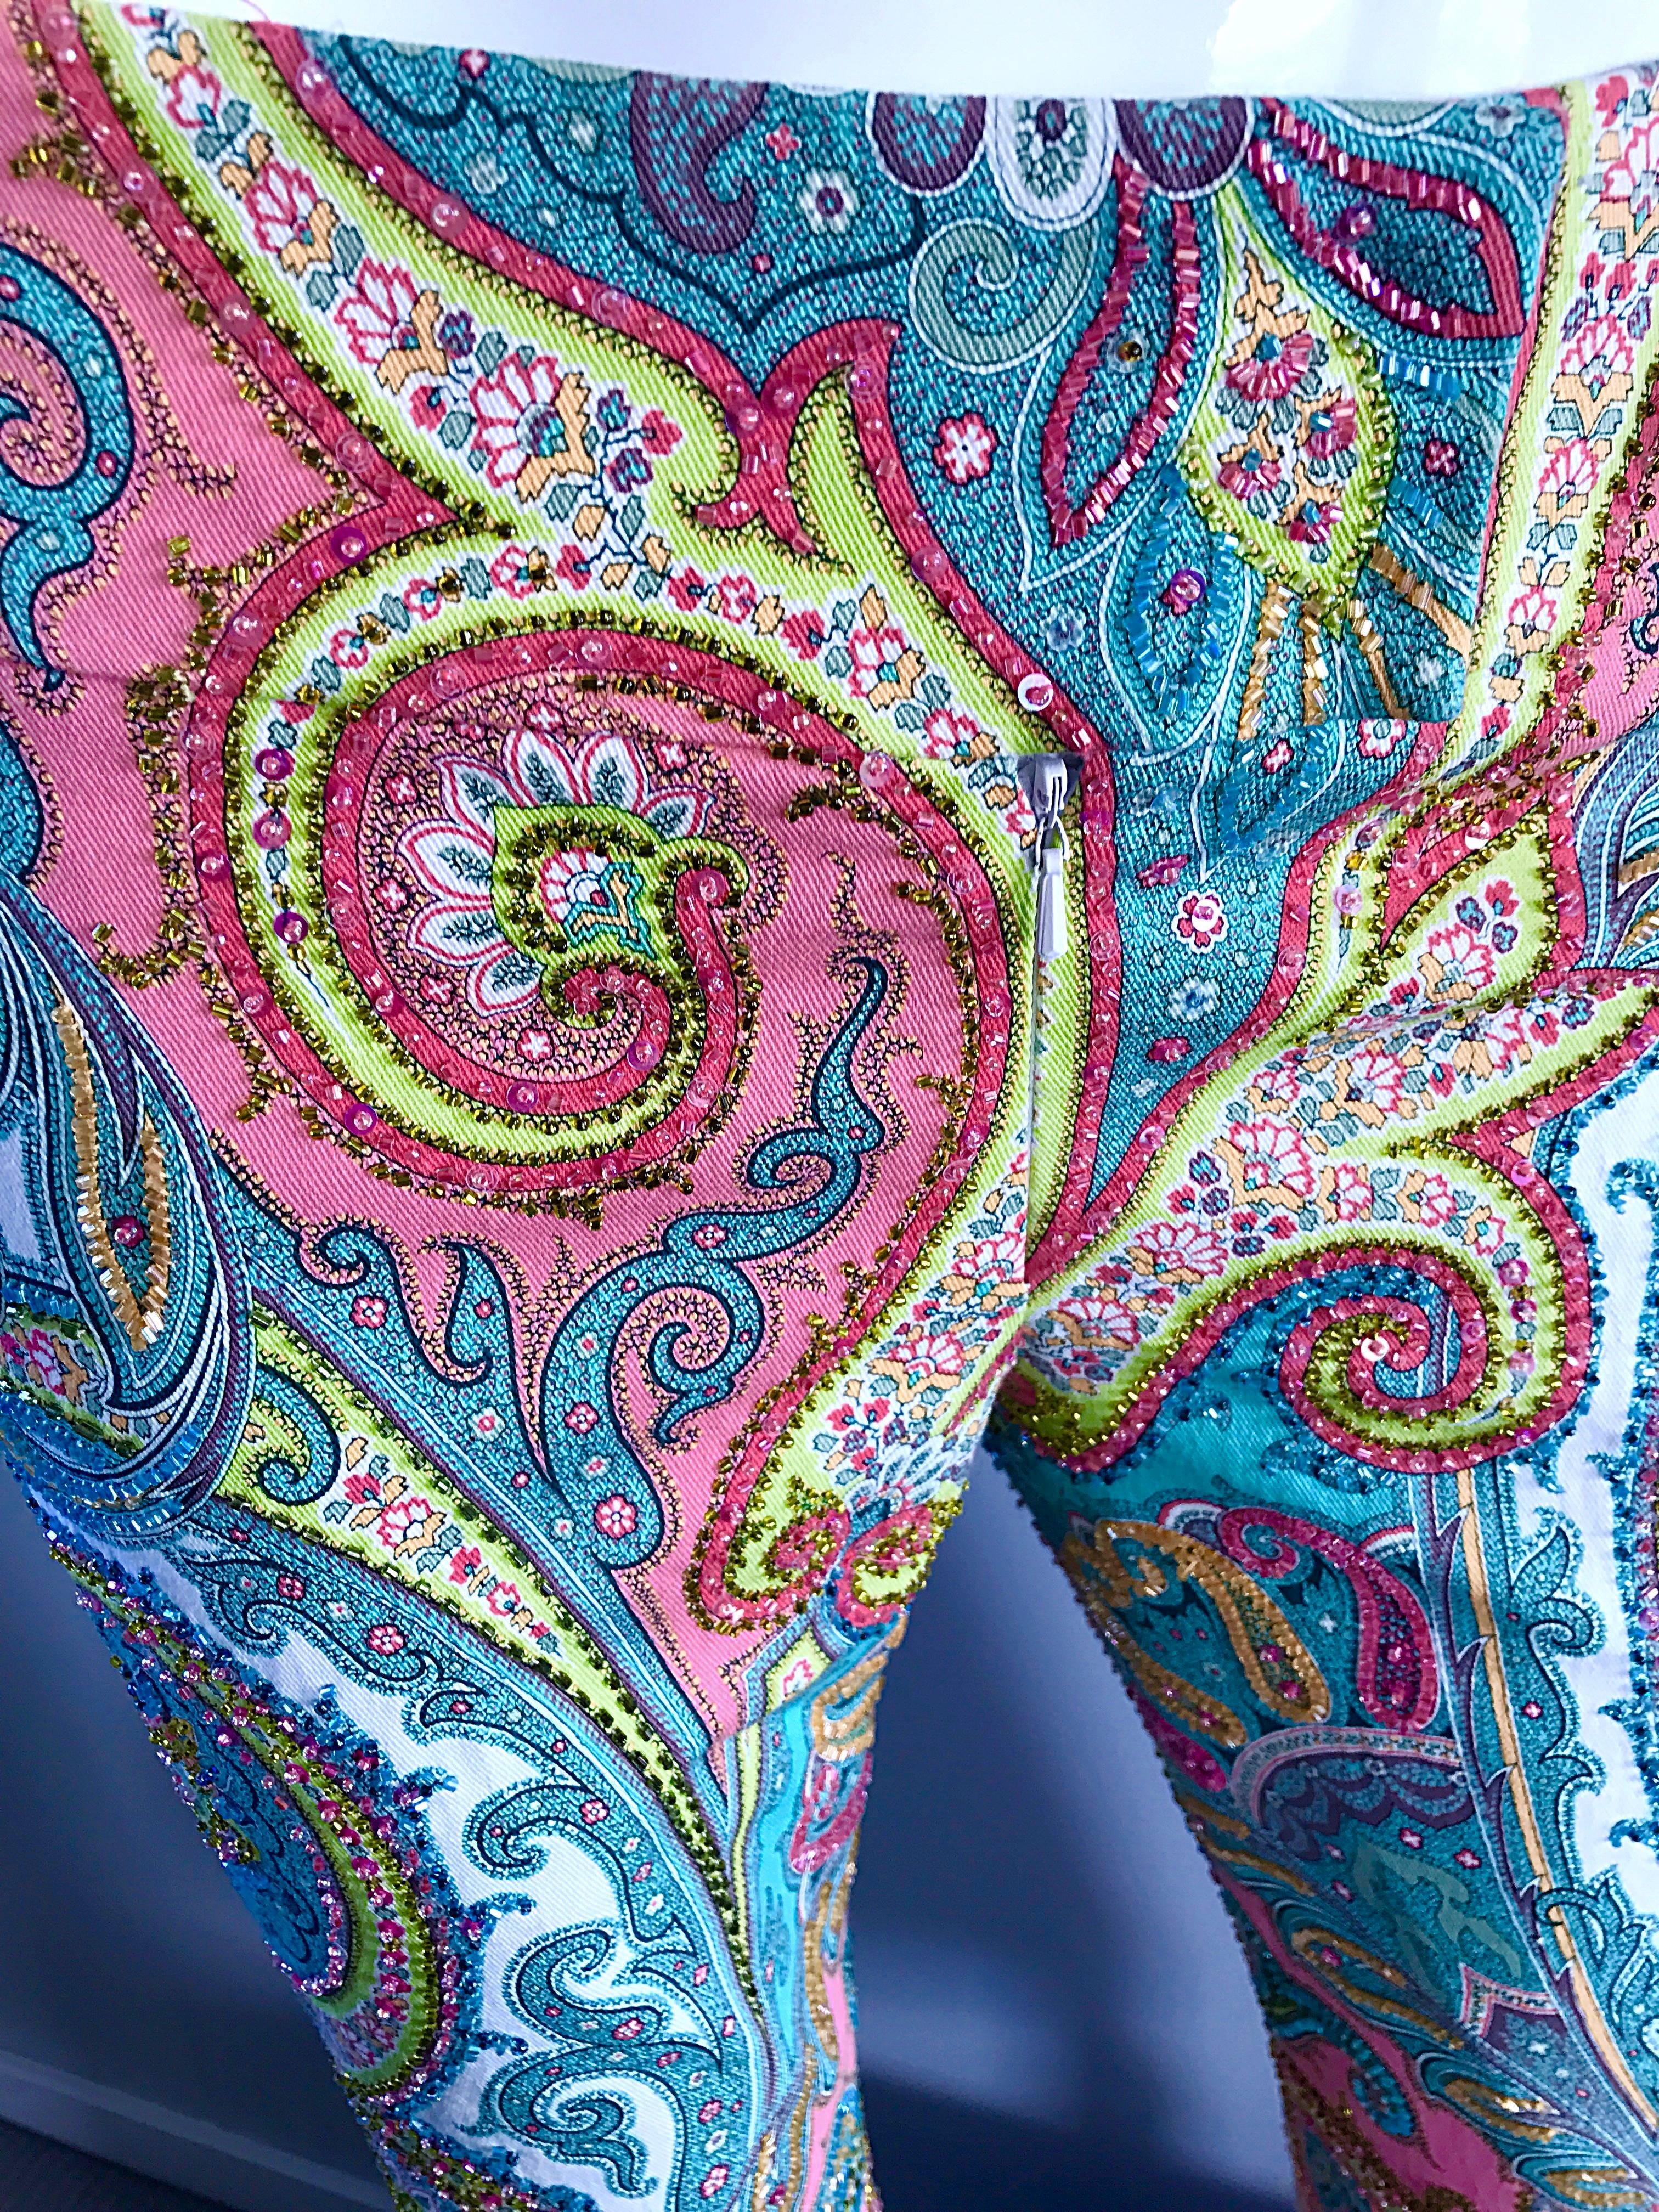 Incredible CARMEN MARC VALVO 90s fully beaded colorful paisley flared leg low rise trousers! Features thousands of hand-sewn beads throughout the front and back. Flattering low-rise fit. Vibrant hues of pink, blue, coral, green, teal and white.